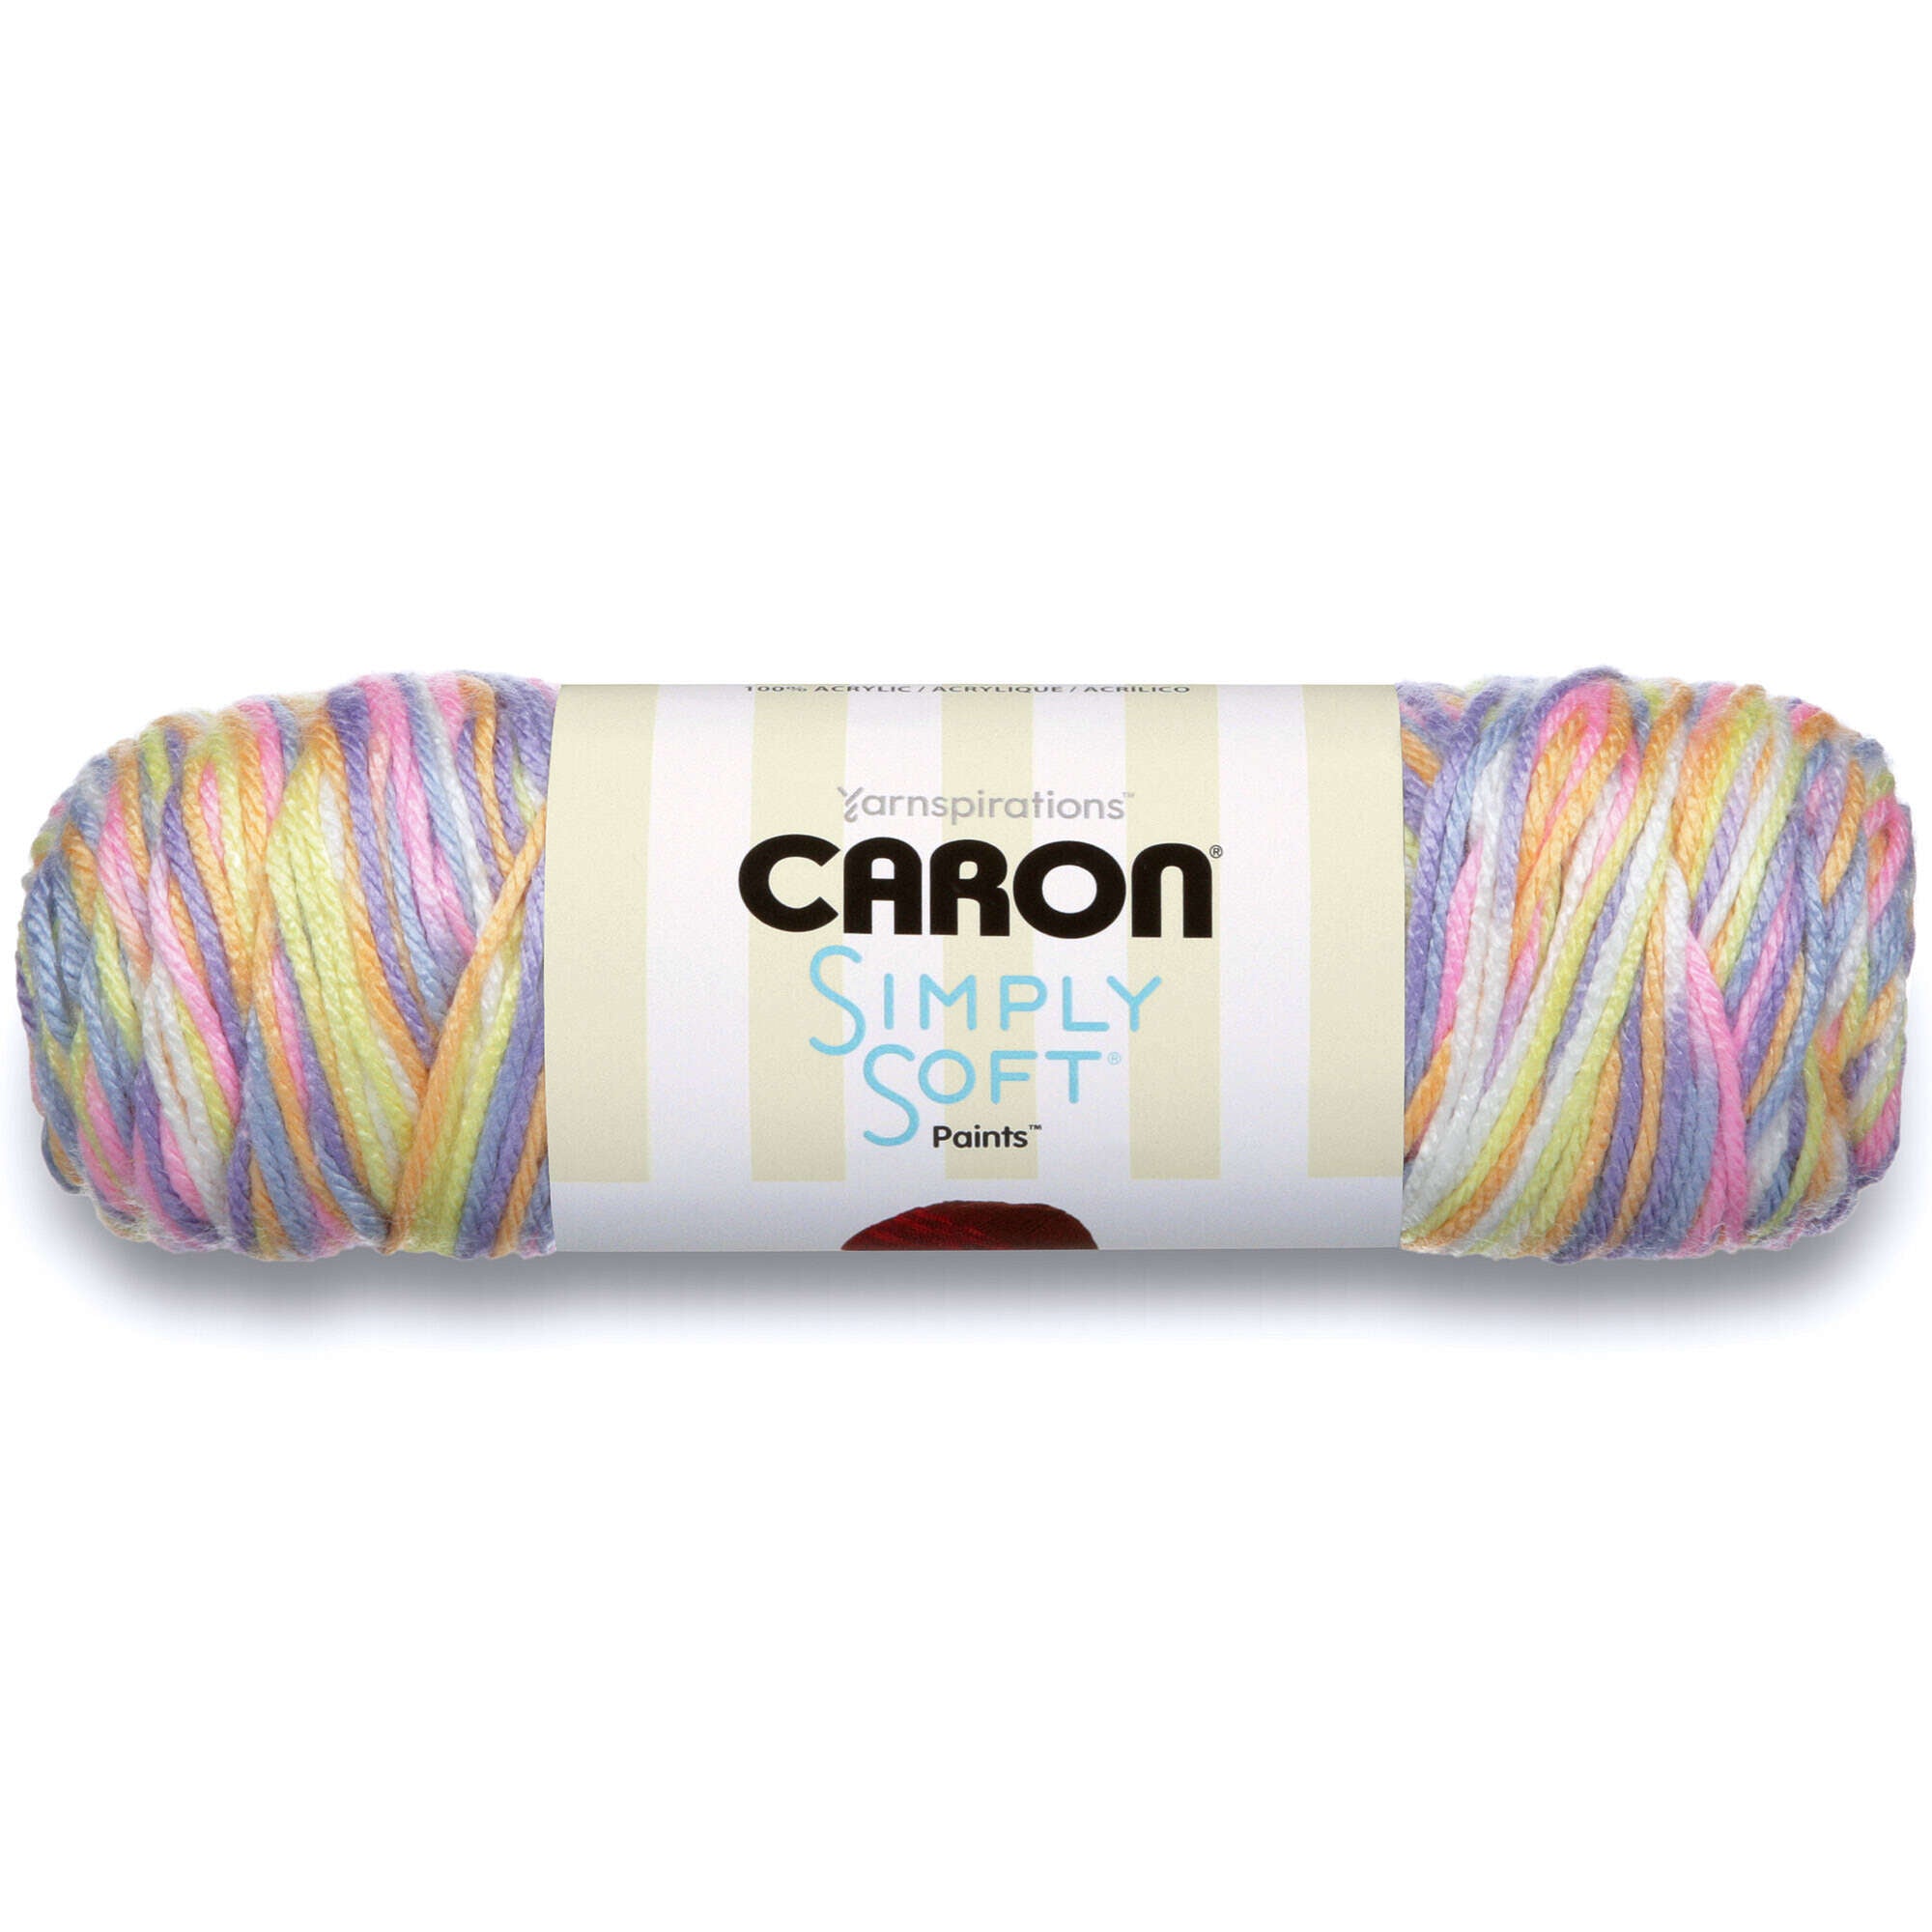 Caron Simply Soft Rose Garden Paints Yarn - 3 Pack of 141g/5oz - Acrylic, 3  - Jay C Food Stores